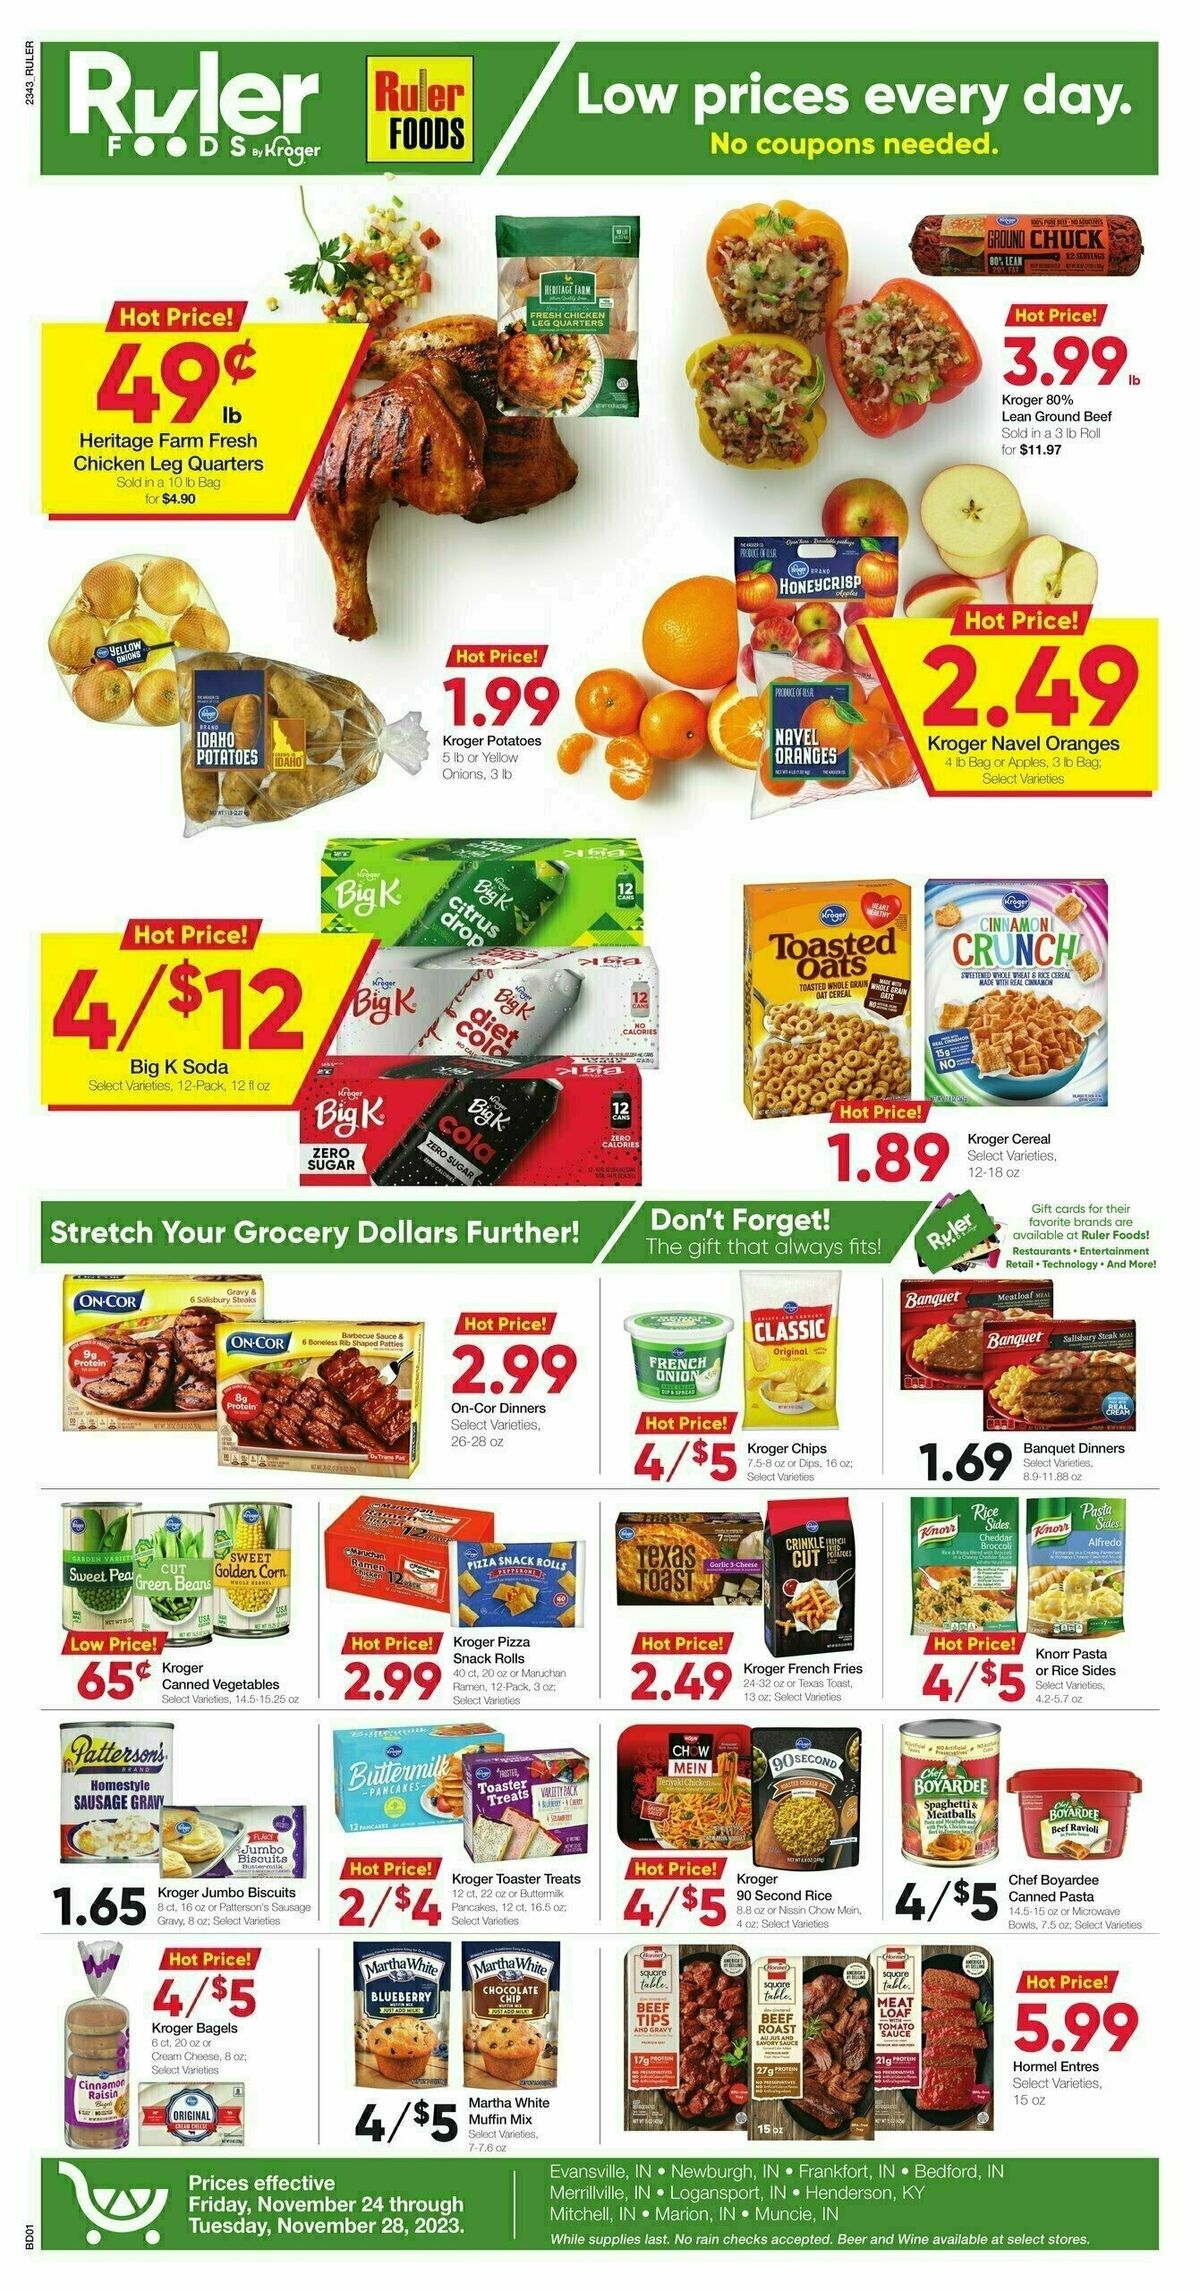 Ruler Foods Weekly Ad from November 24